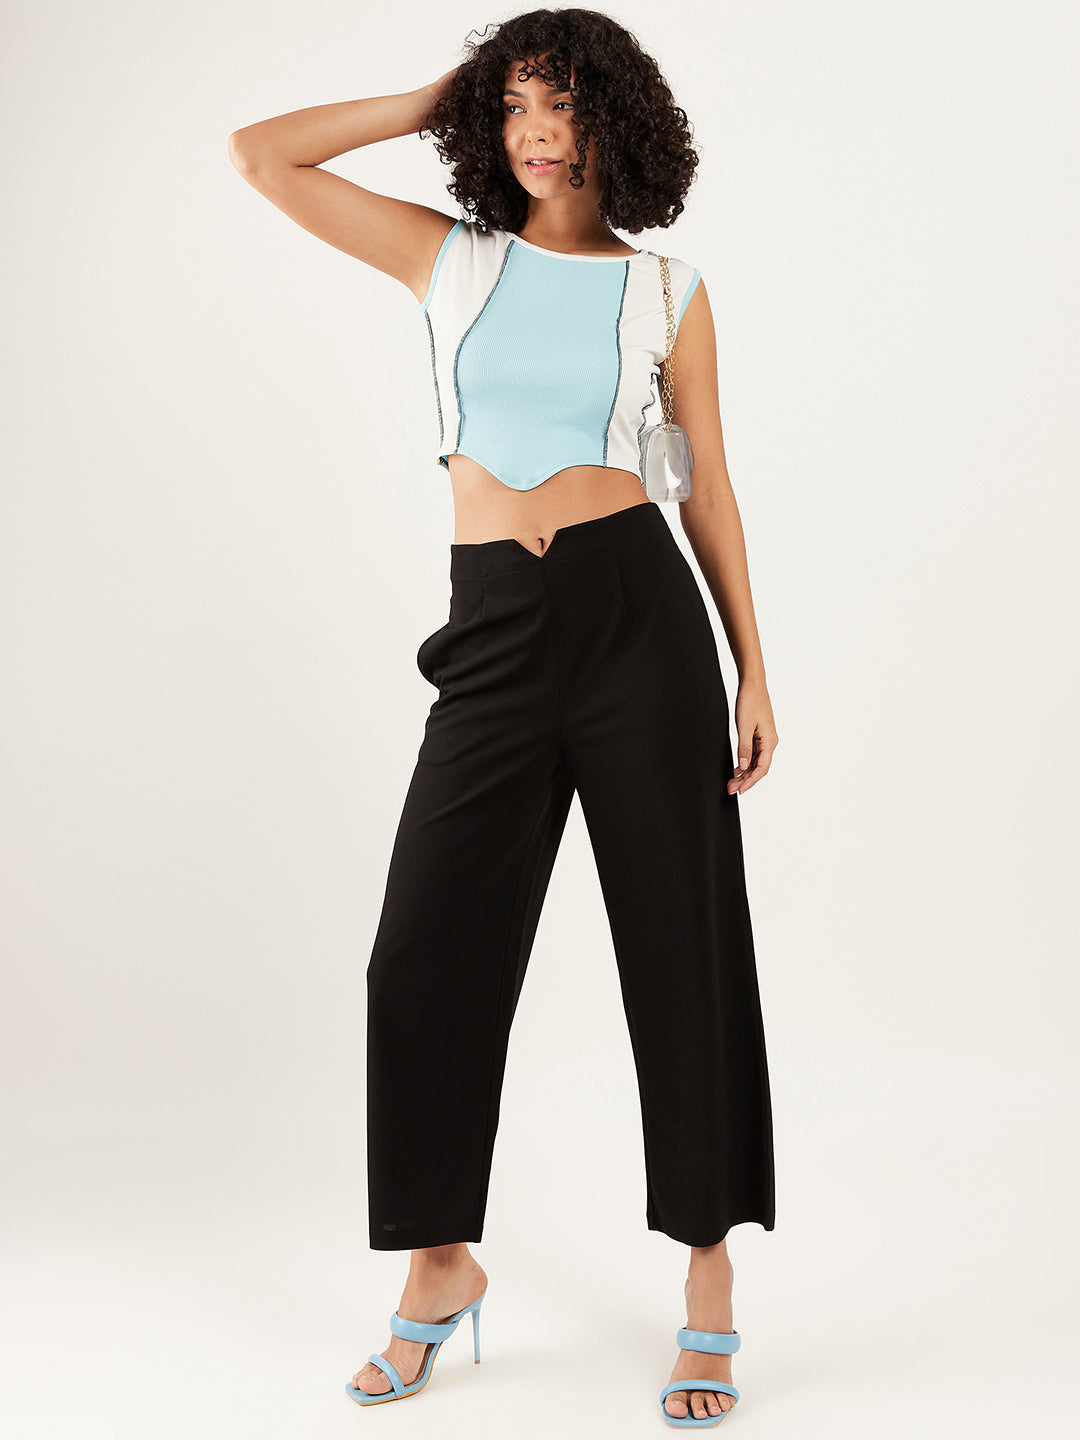 Athena Colourblocked Fitted Crop Top